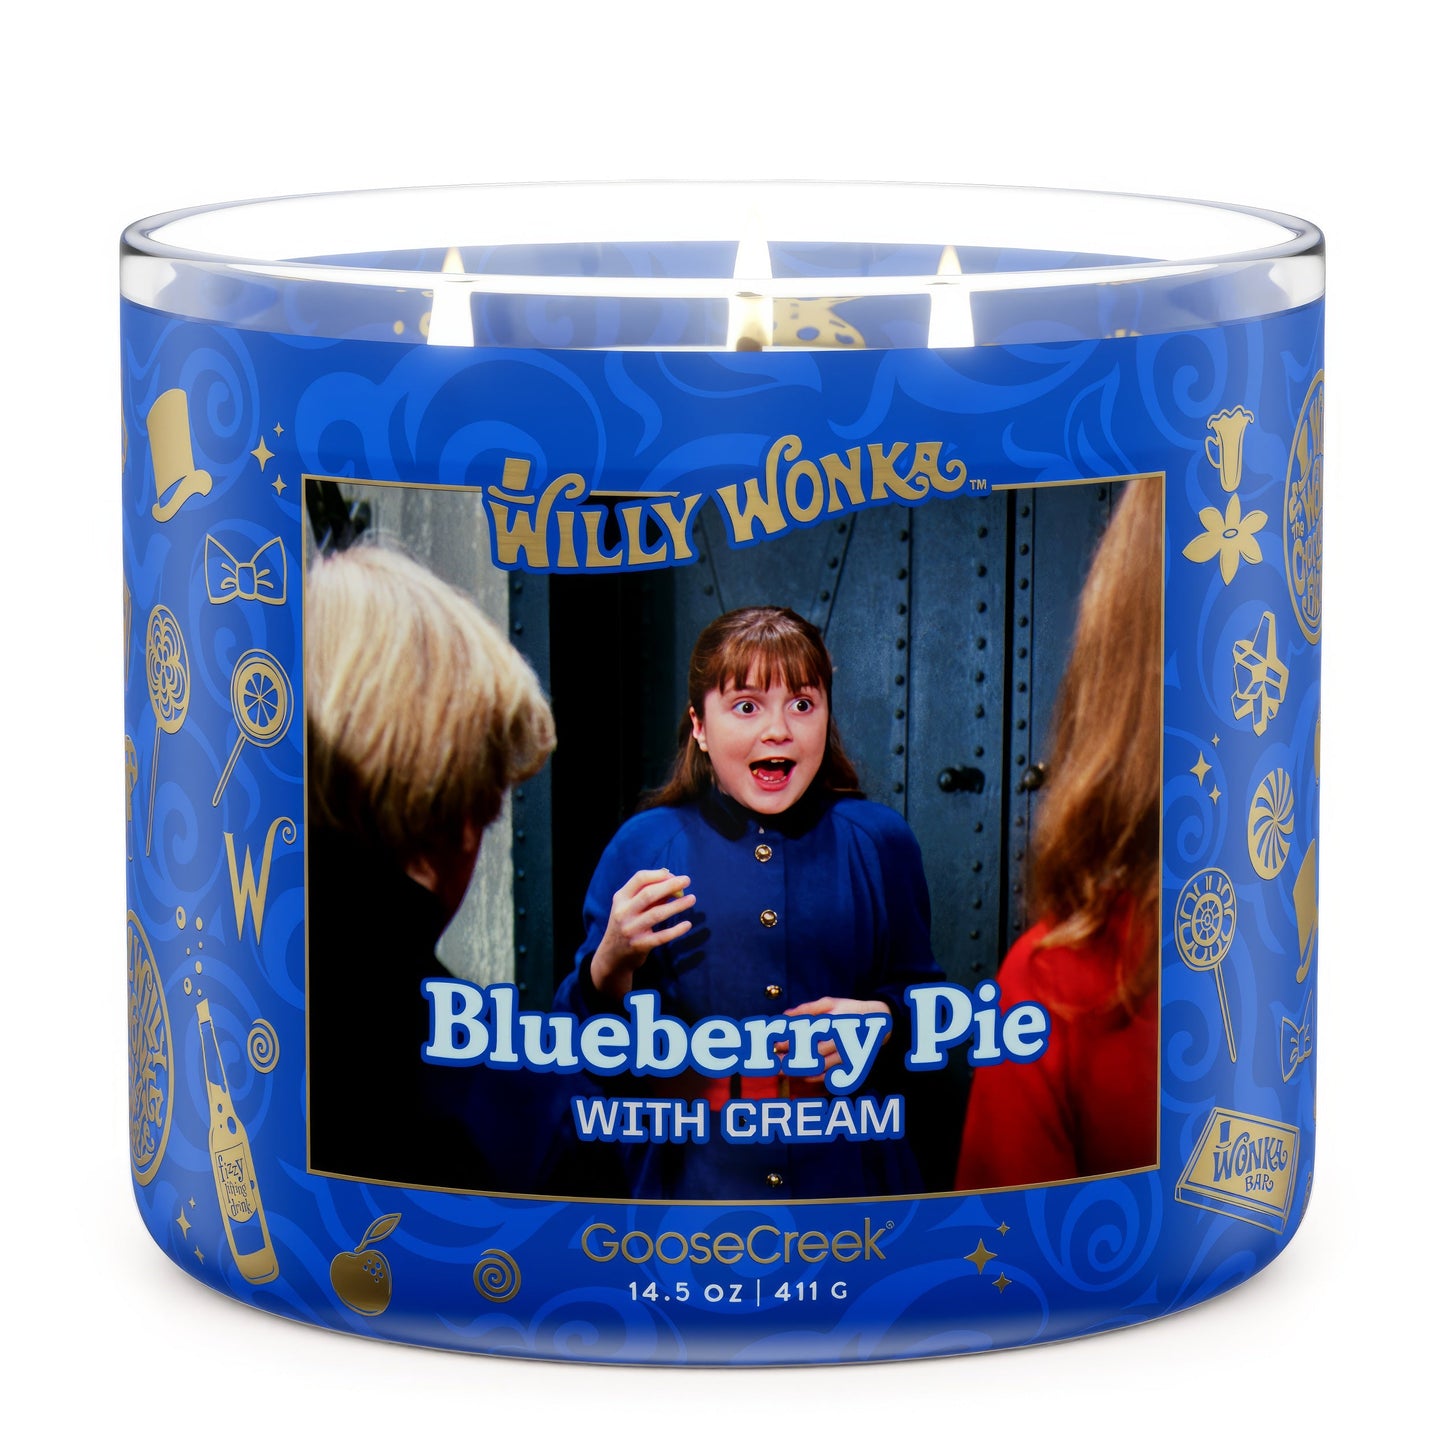 Blueberry Pie With Cream 3-Wick Wonka Candle